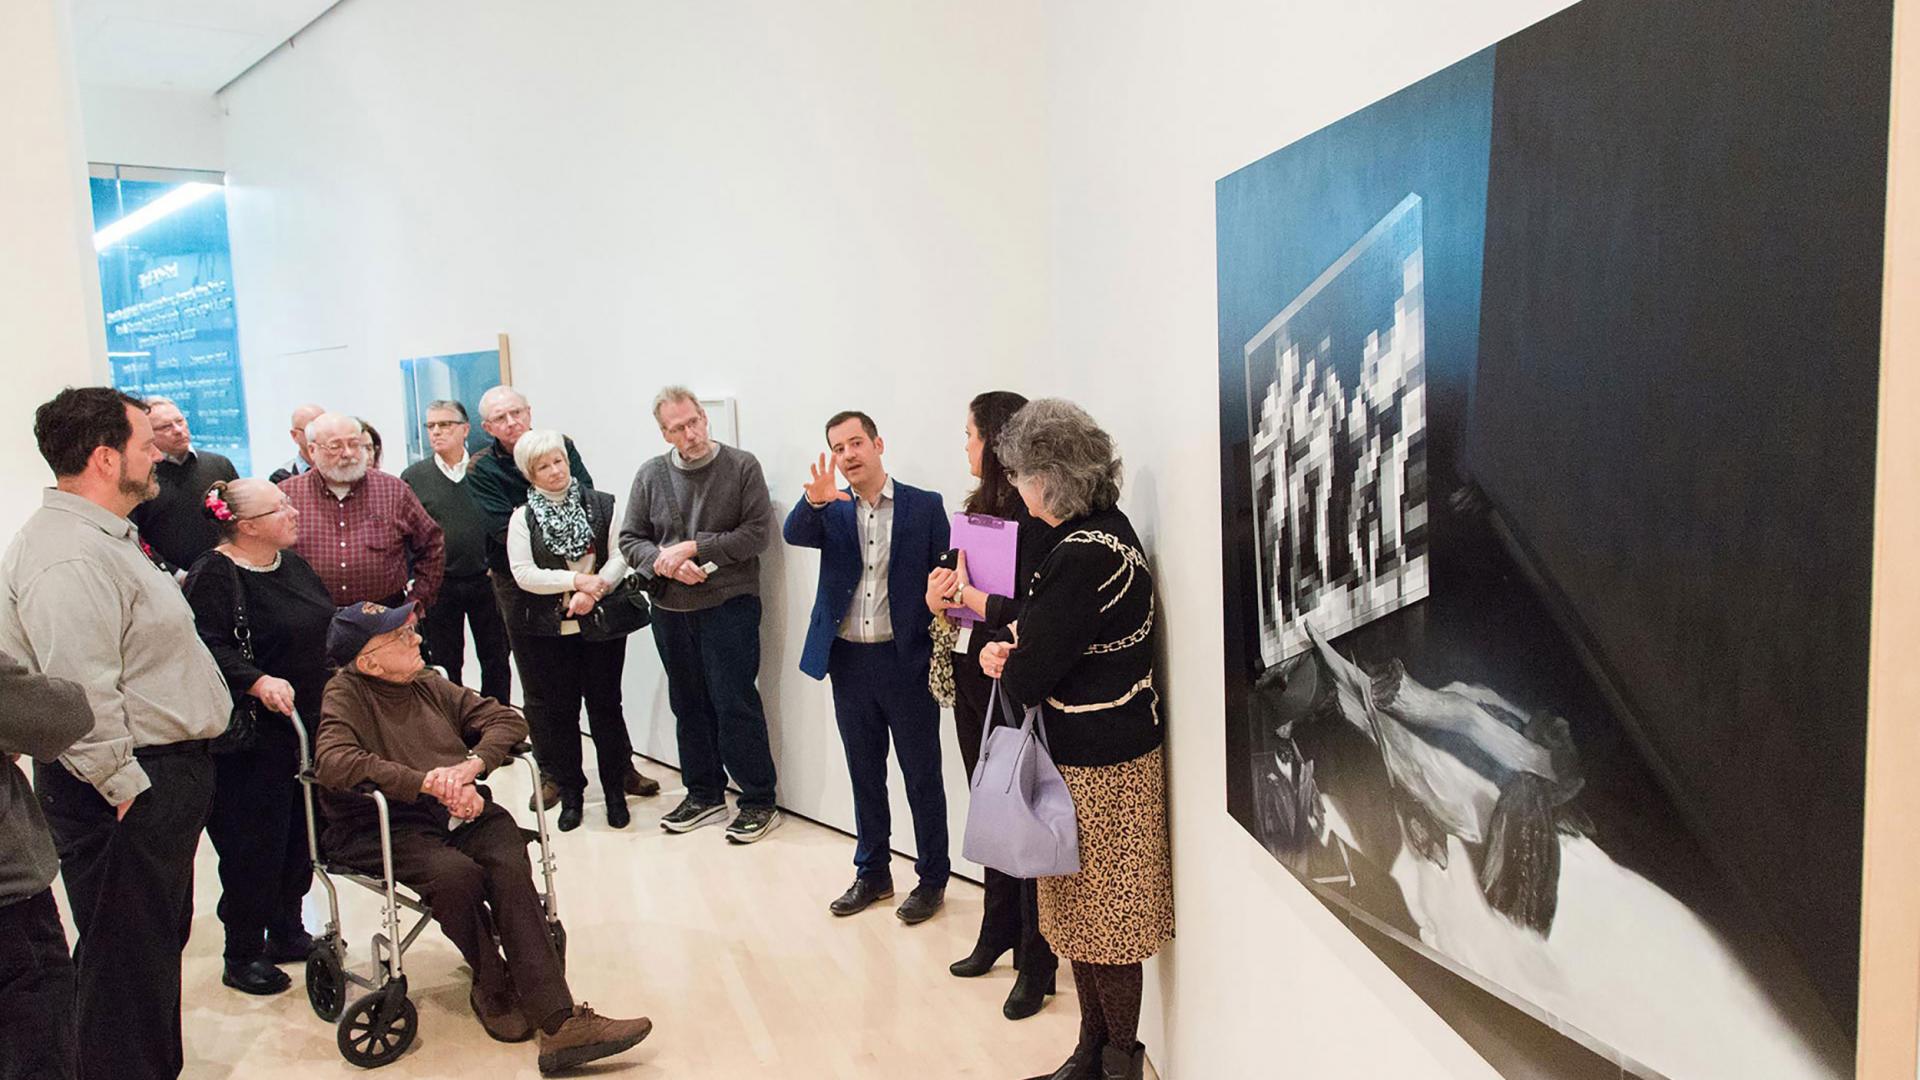 Group of adults listening to a lecture in a gallery